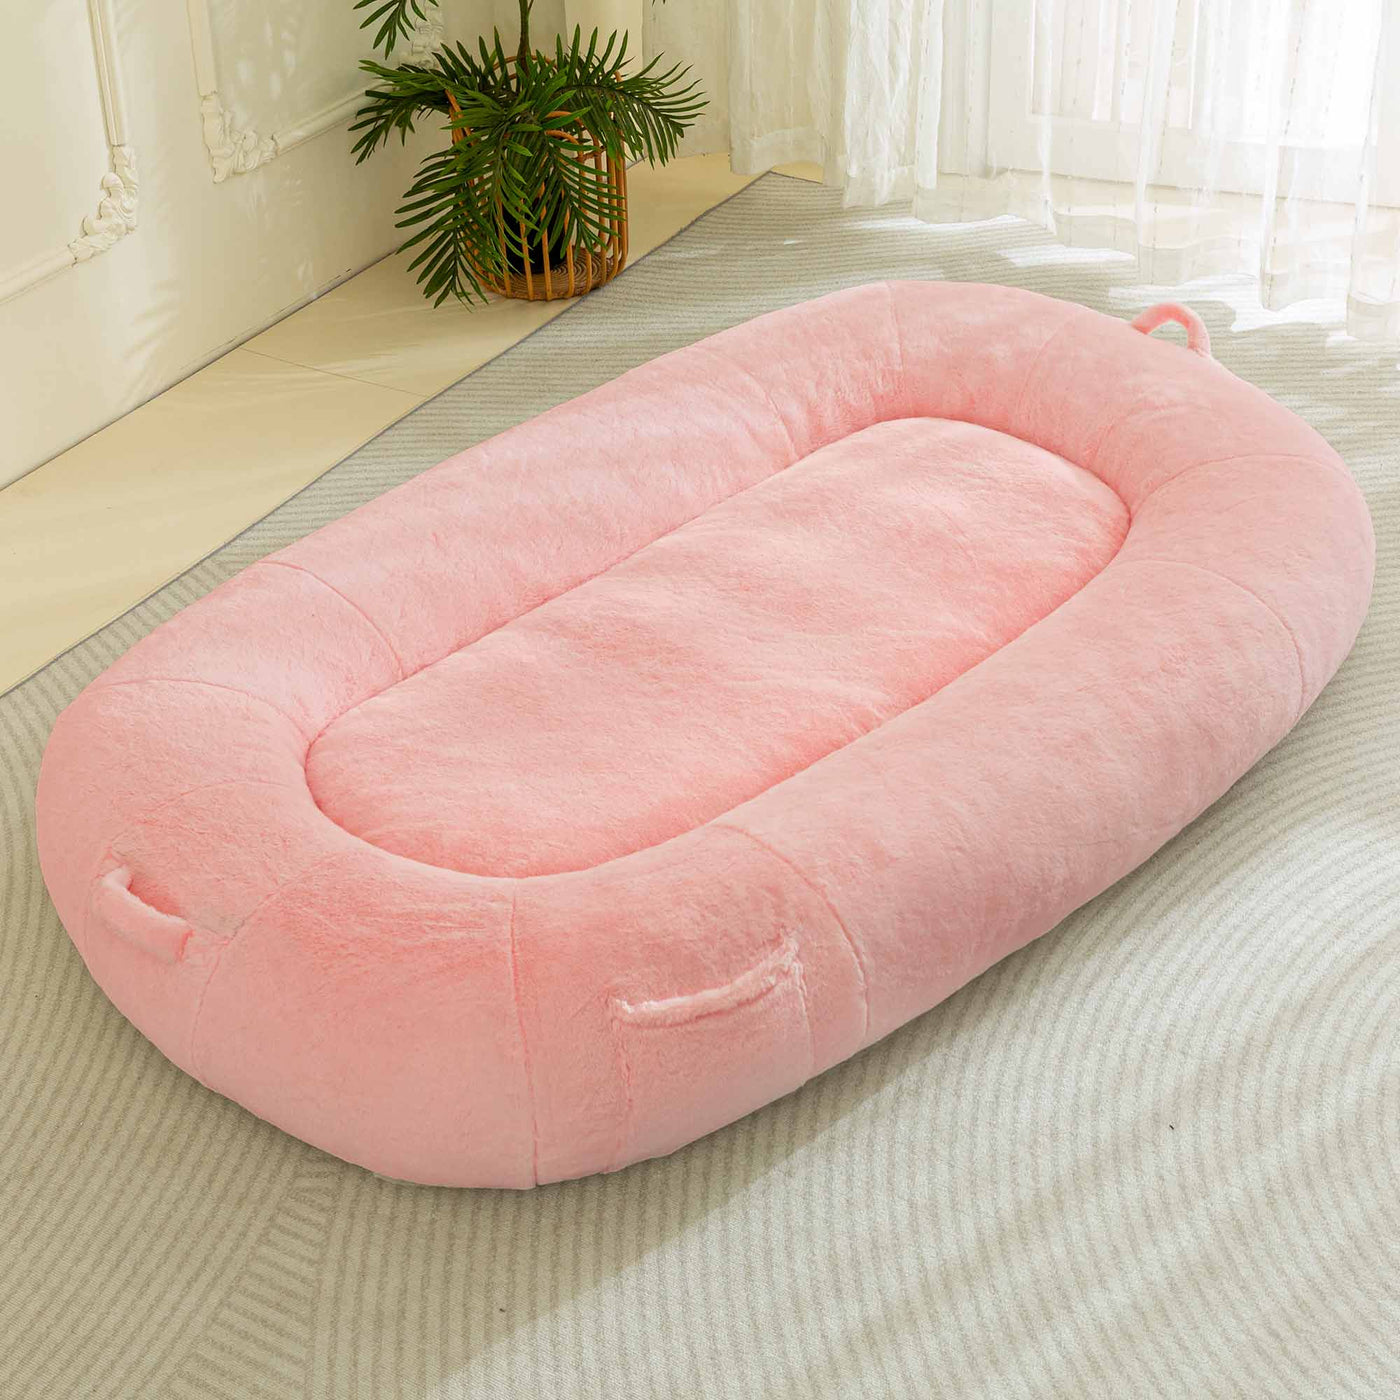 MAXYOYO Human Dog Bed, Faux Fur Giant Bean Bag Bed for Humans and Pets, Pink